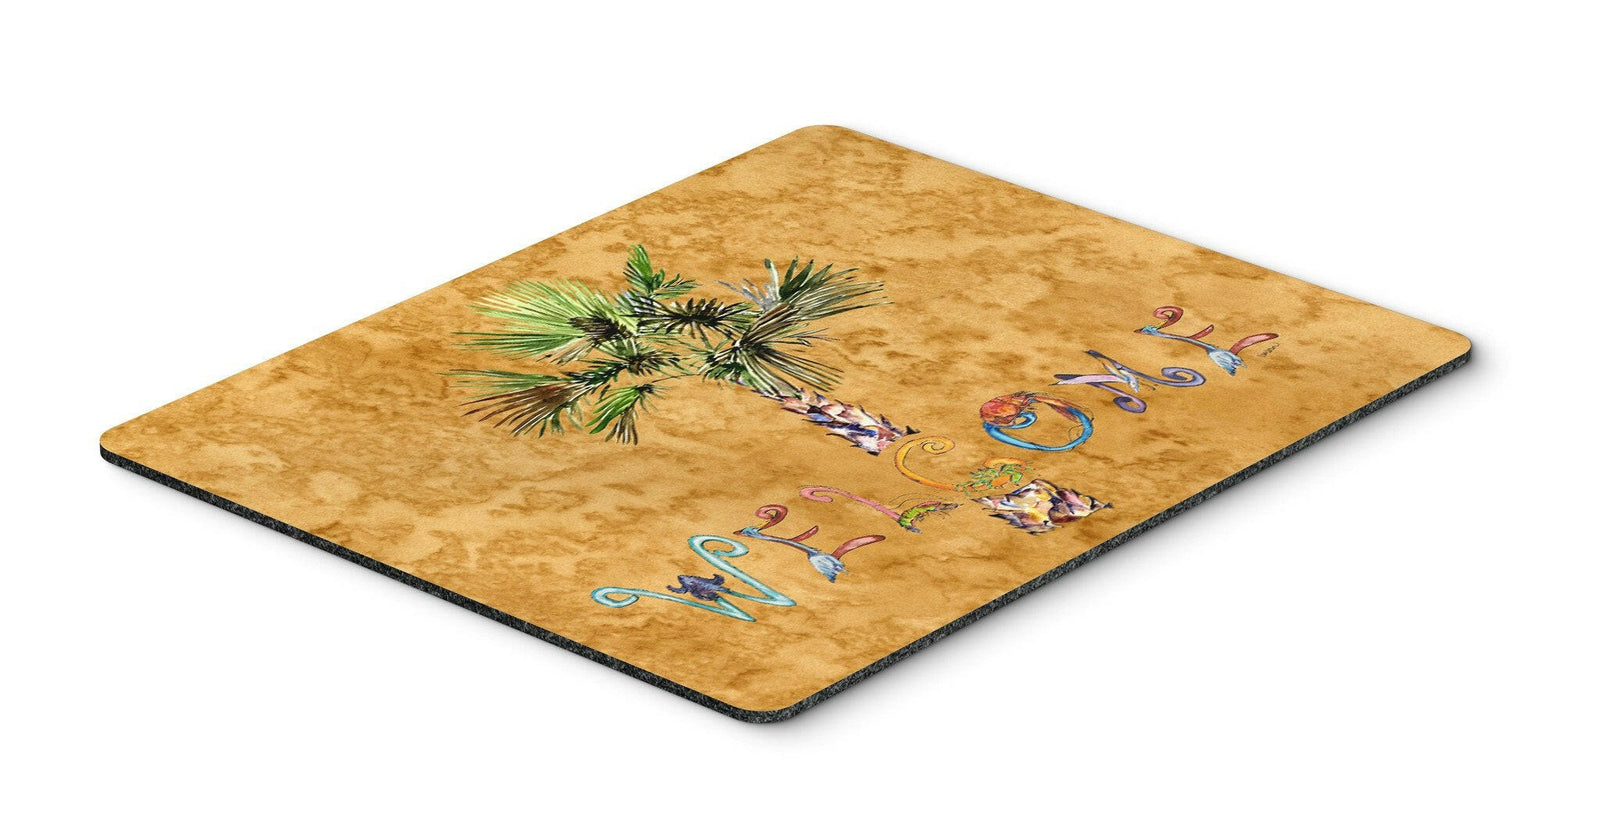 Welcome Palm Tree on Gold Mouse Pad, Hot Pad or Trivet 8709MP by Caroline's Treasures